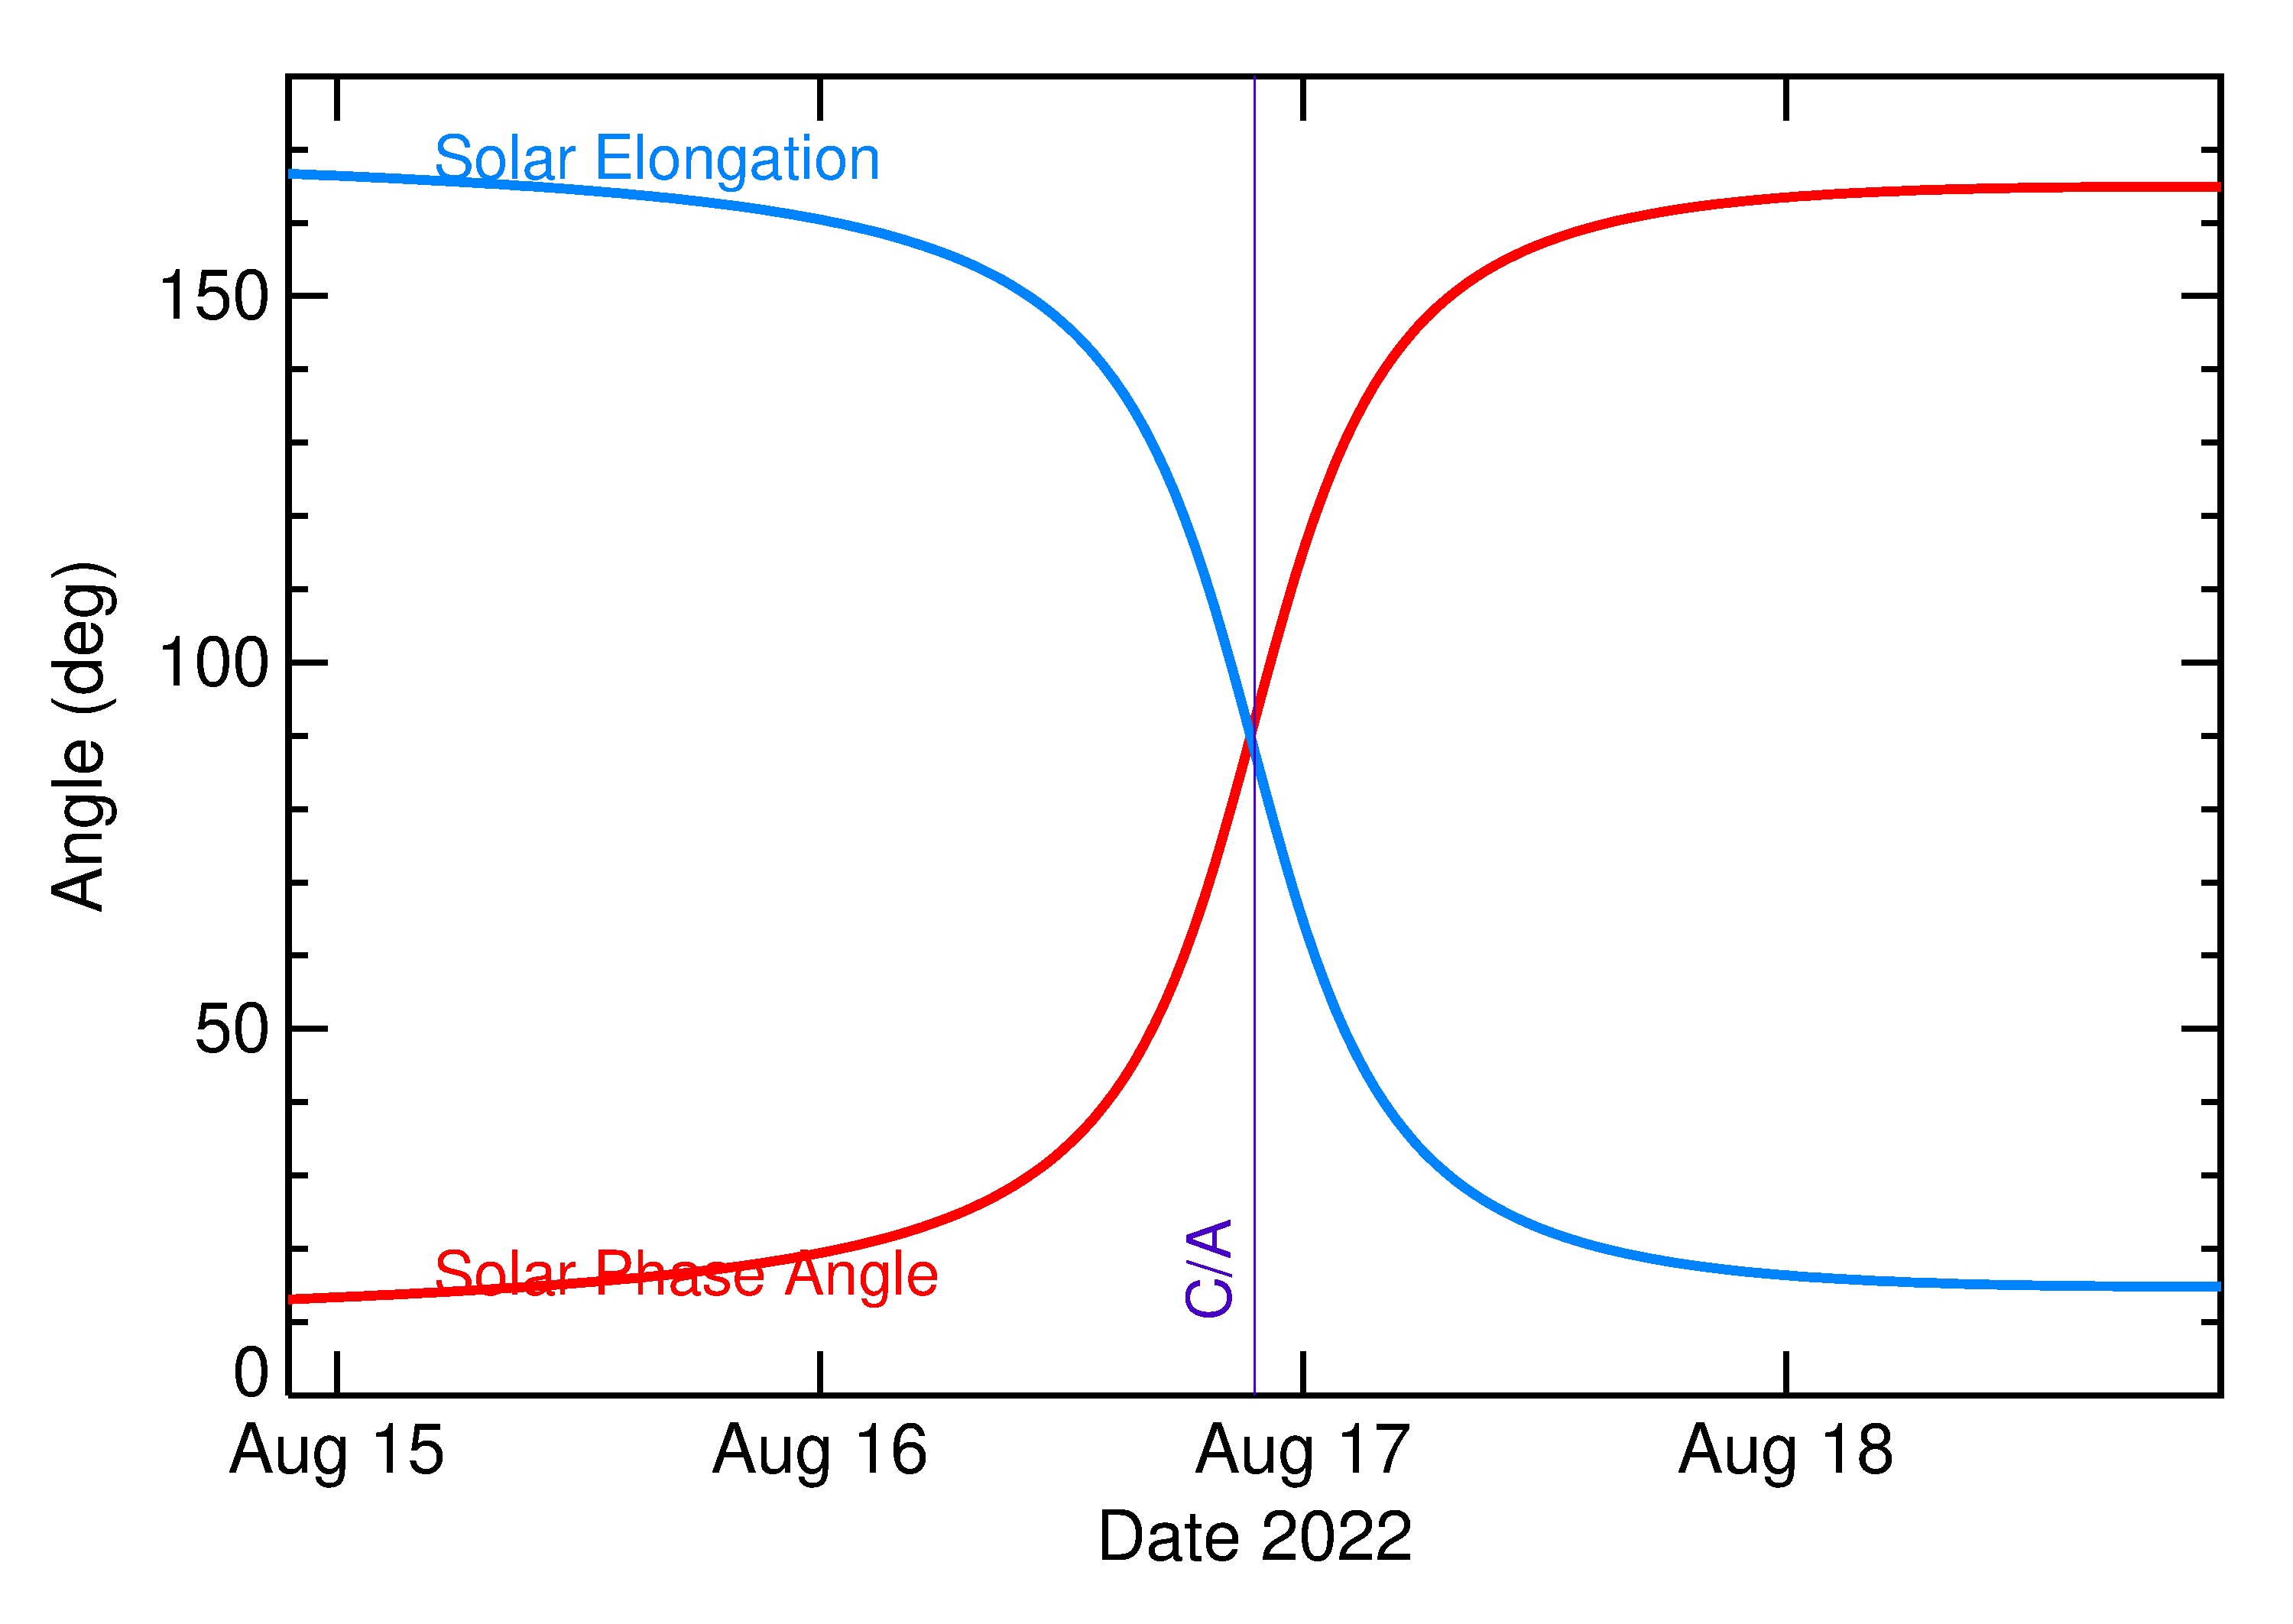 Solar Elongation and Solar Phase Angle of 2022 QA in the days around closest approach